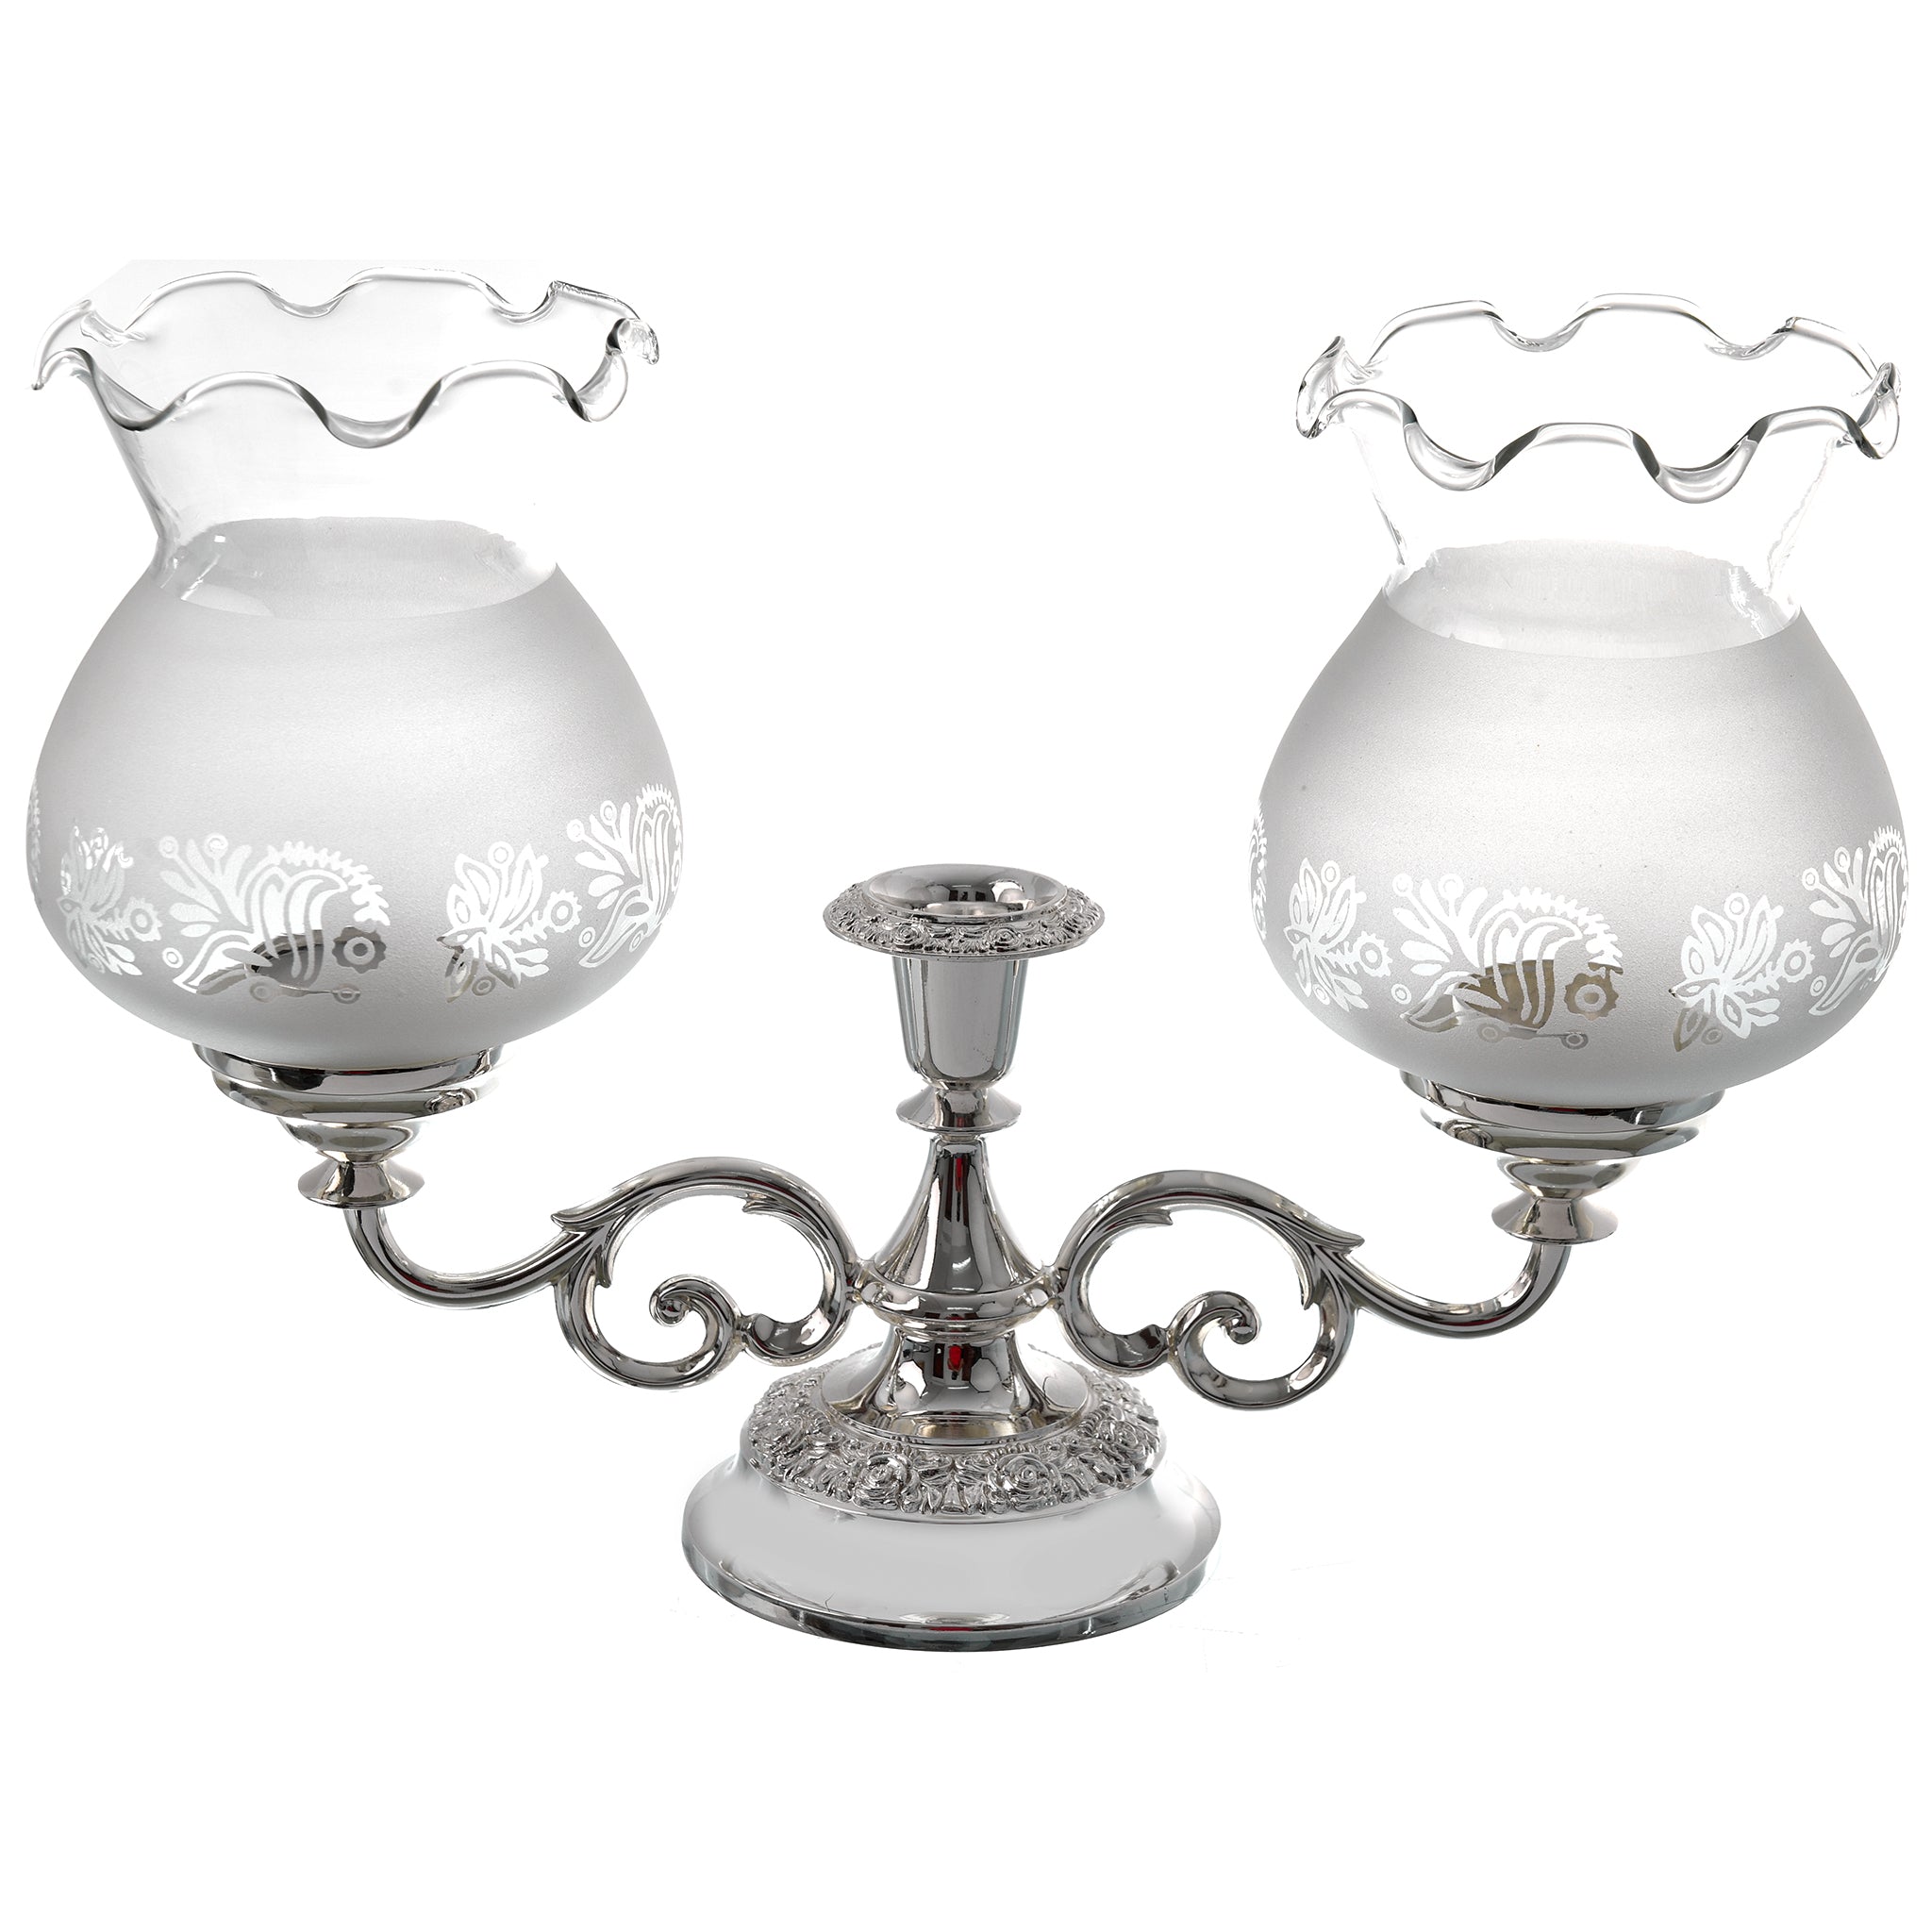 Queen Anne - Double Candle Lamp - Silver Plated Metal - 20.5cm - 26000375